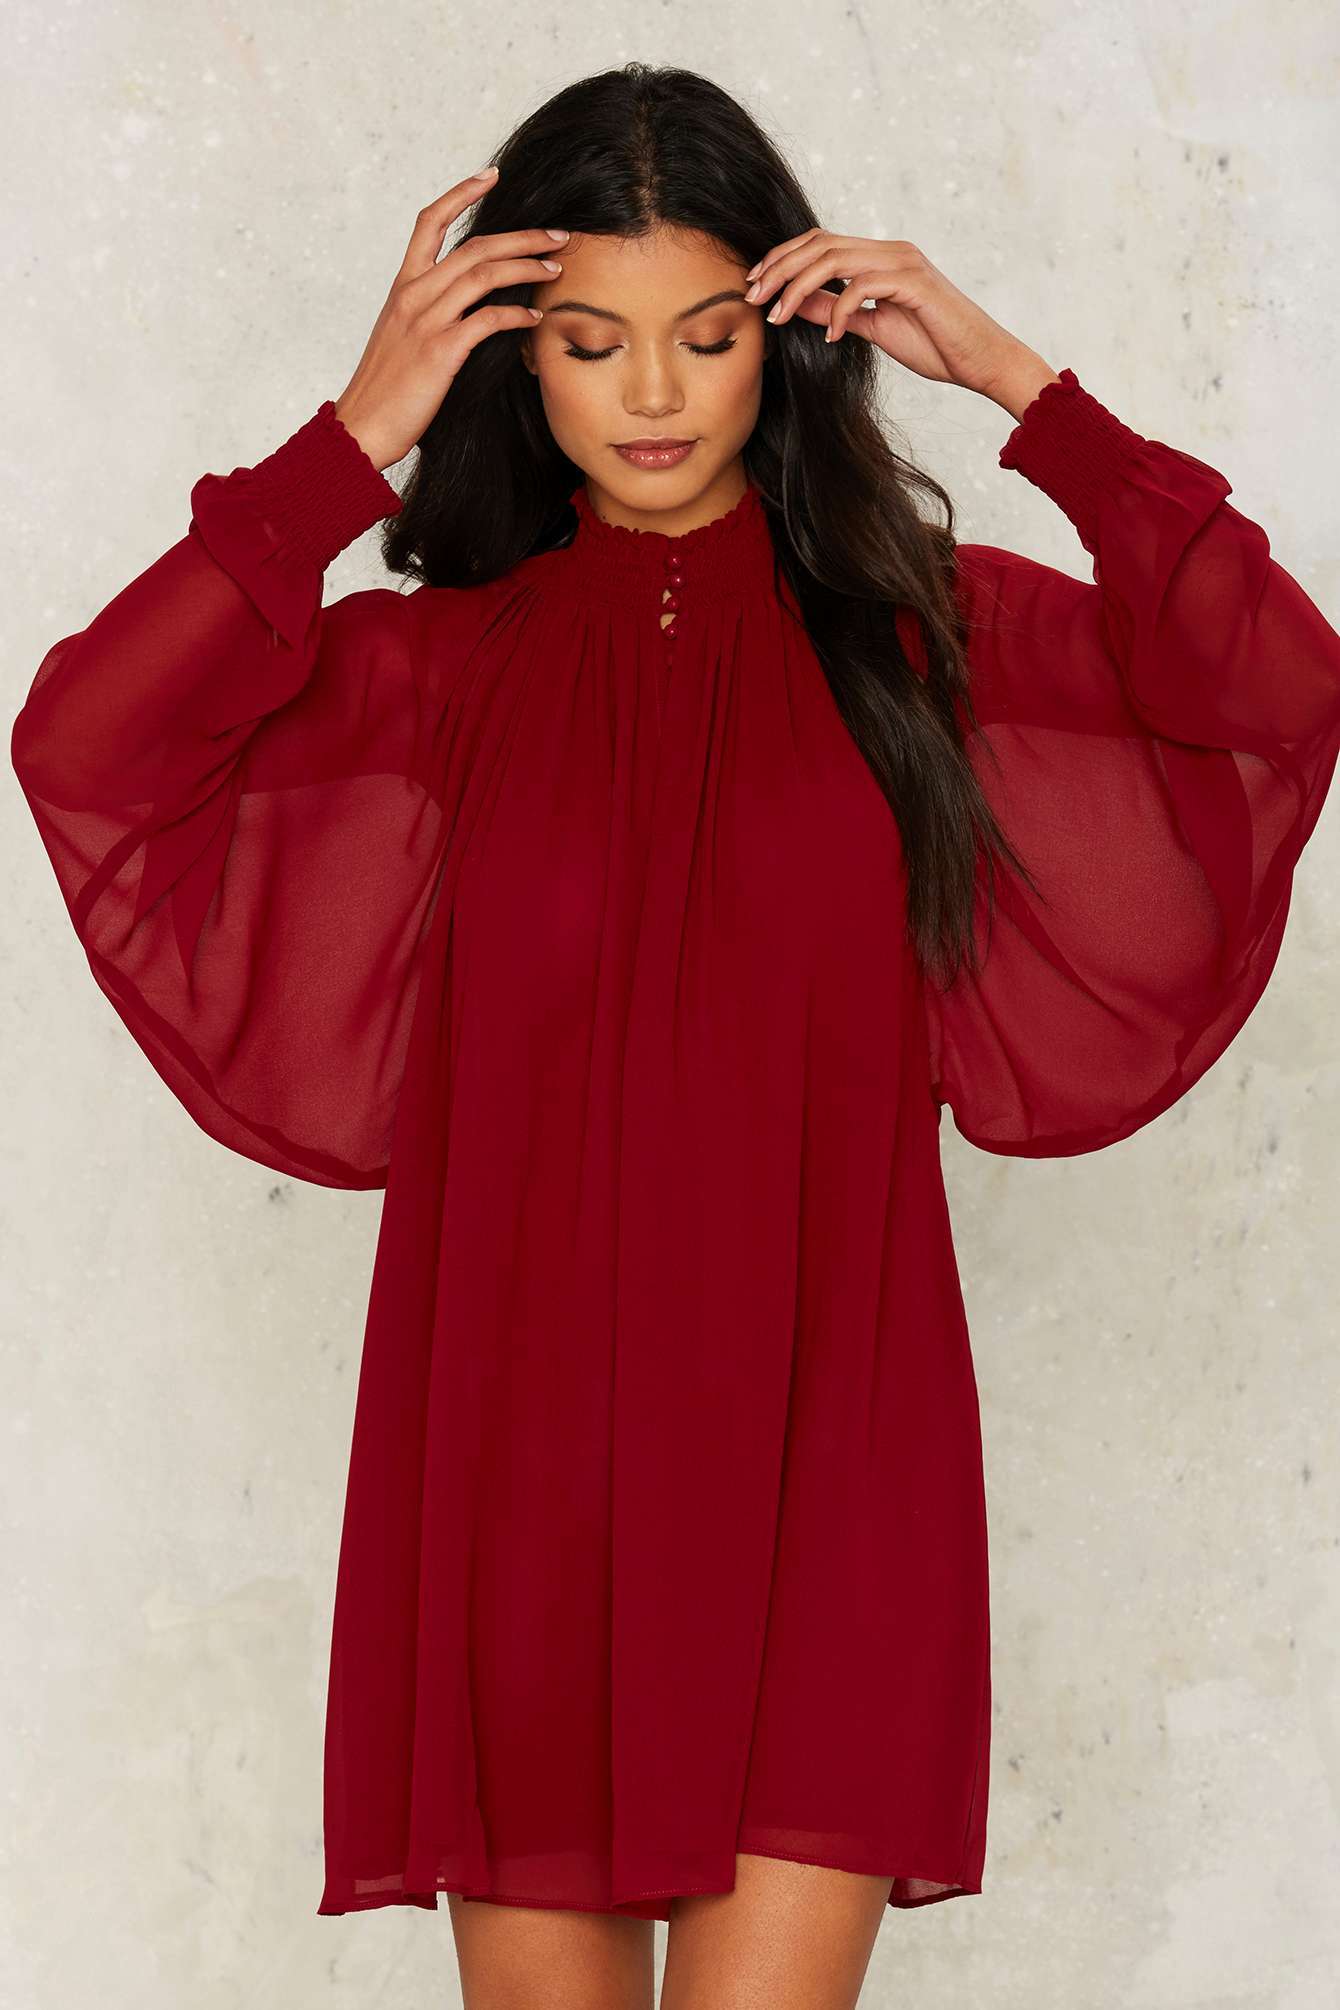 The 10 Red Dresses That Will Set Your Valentine’s Day Off